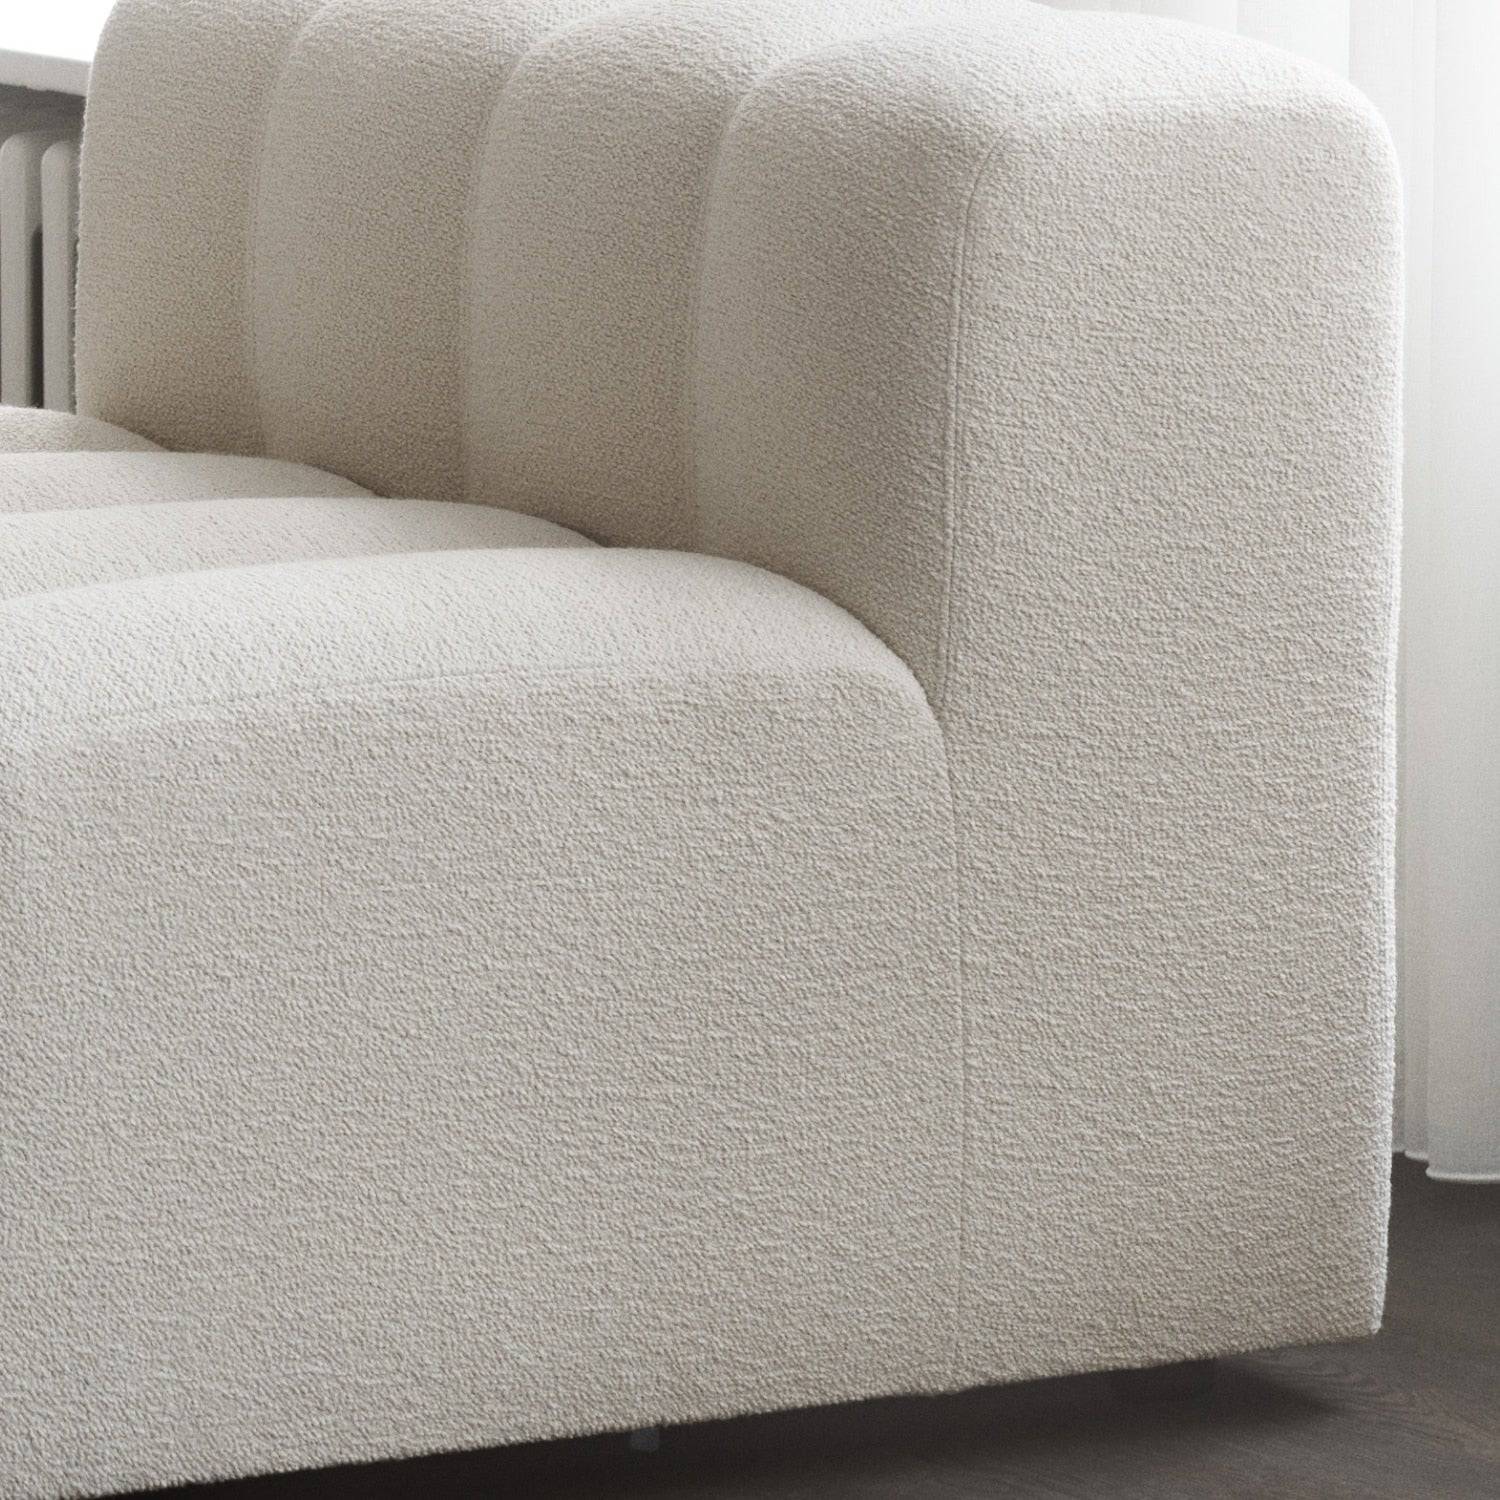 Norr11 Studio 3 Made To Order Barnum Col 24 - KANSO#Upholstery_Barnum Col 24